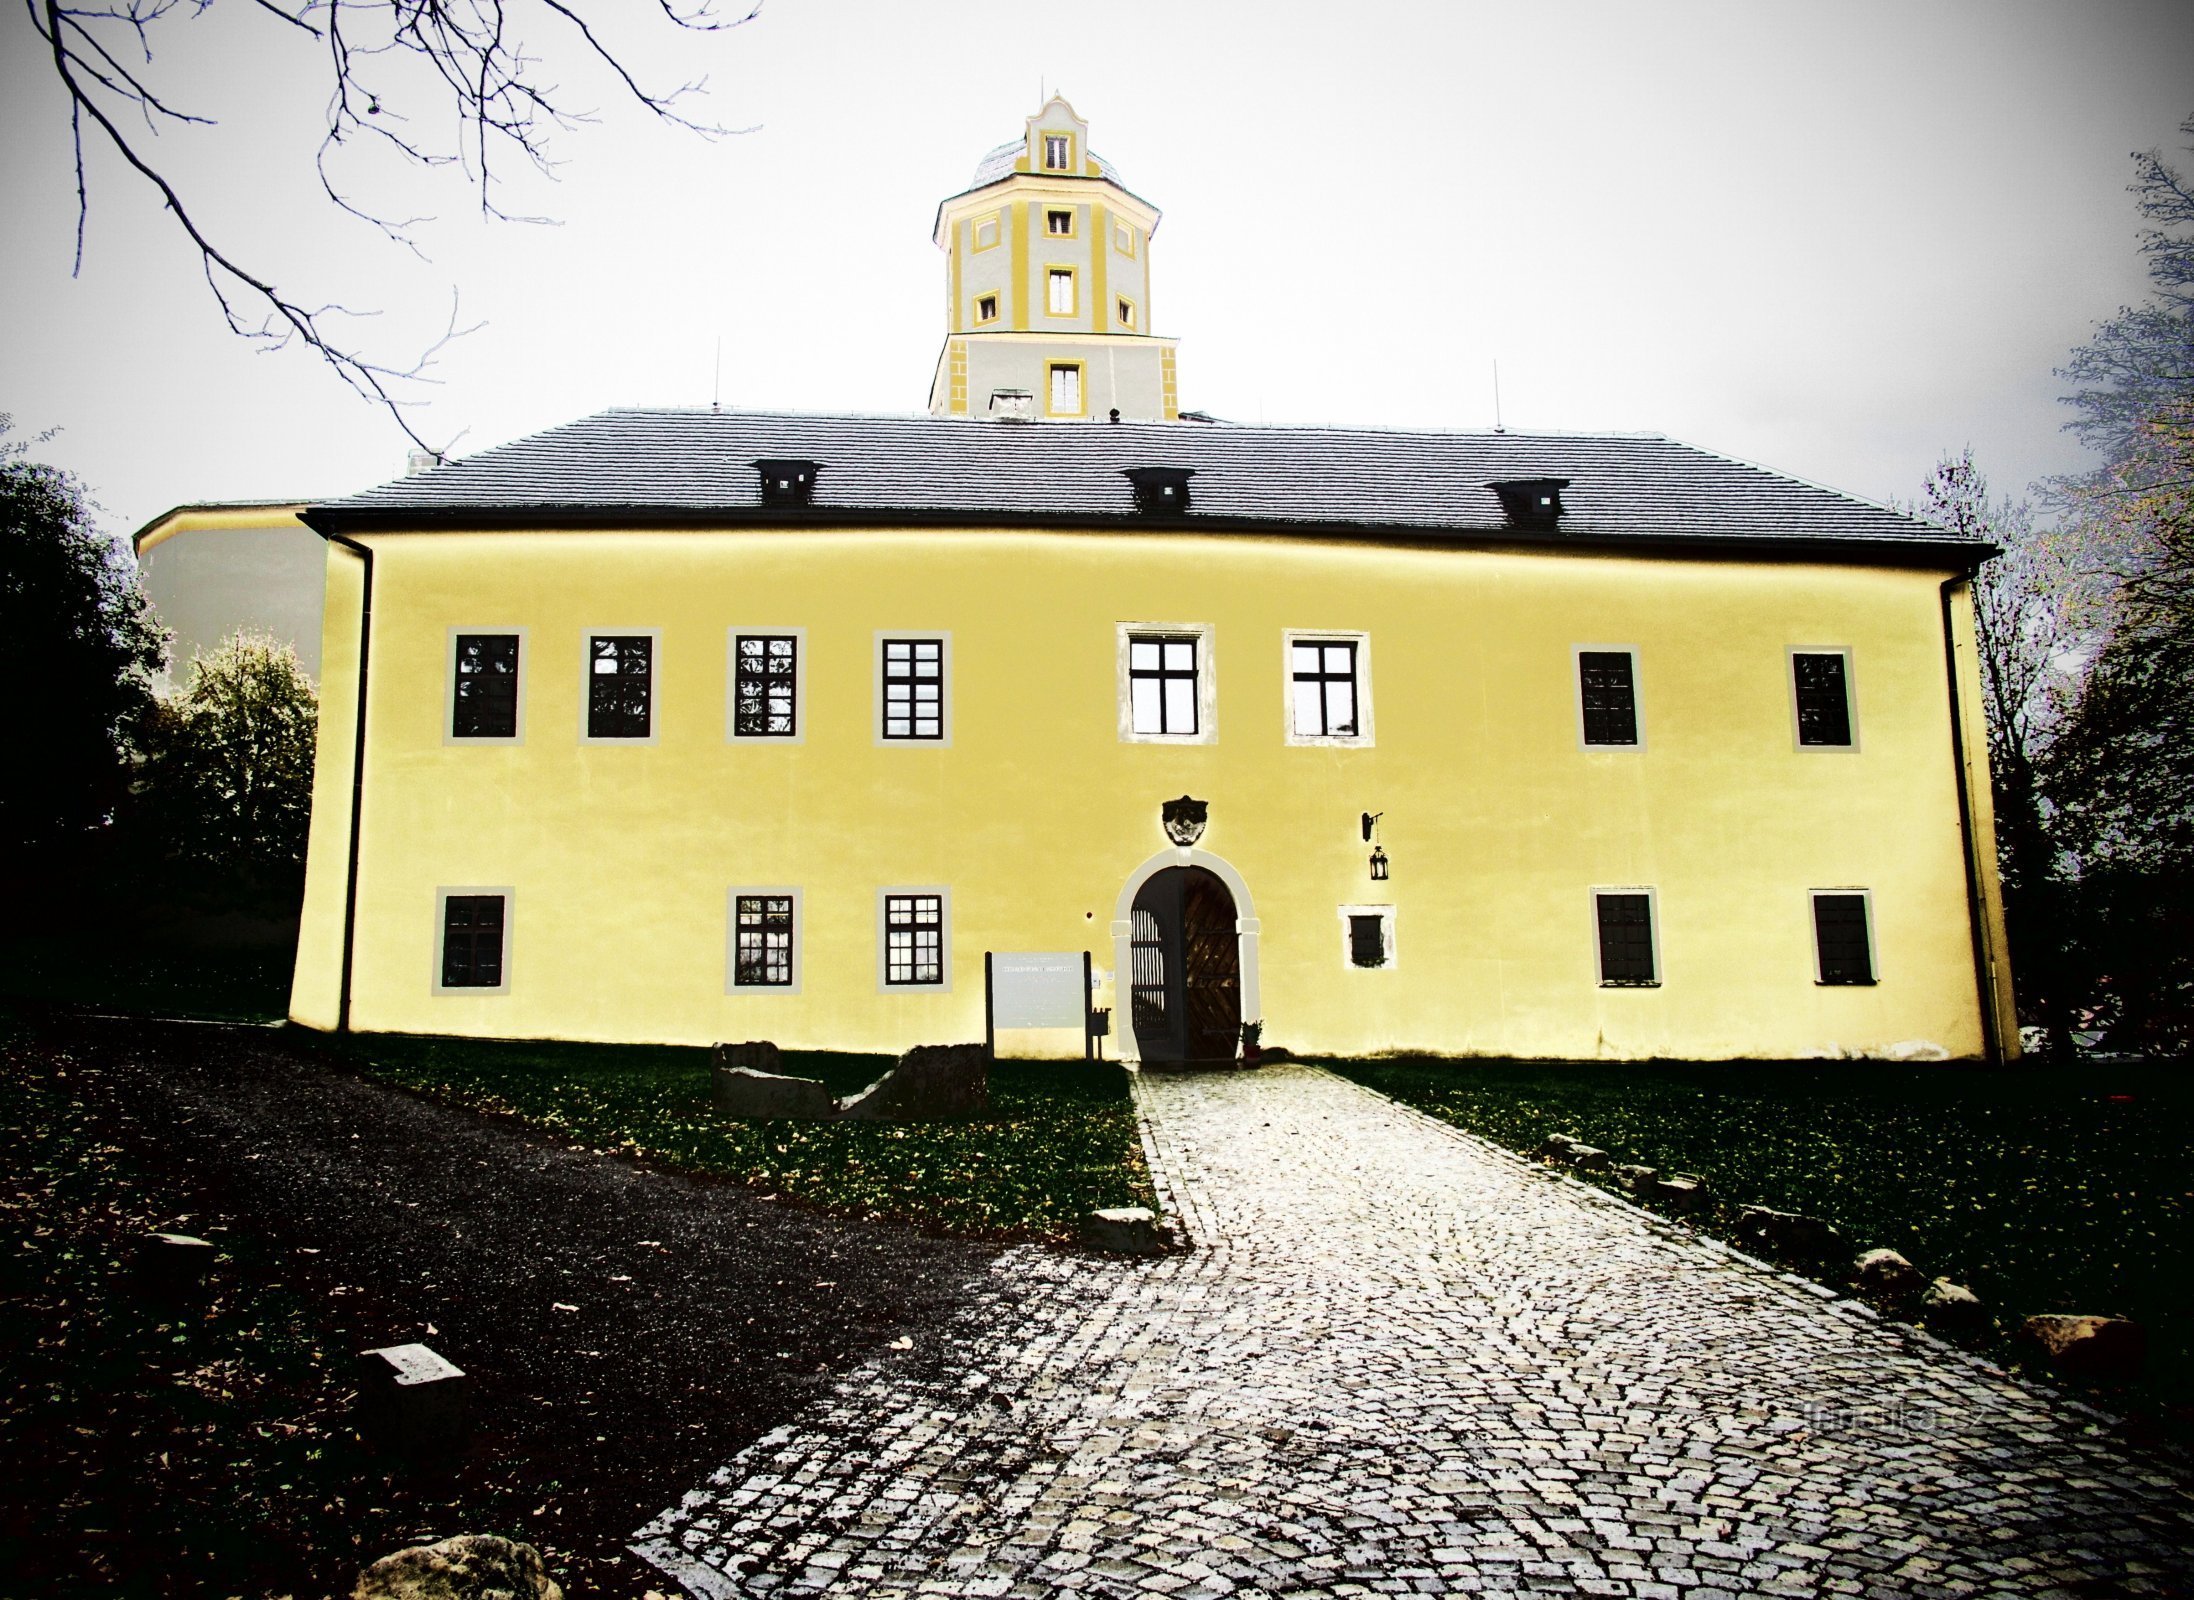 Behind the new exhibits to the castle in Malenovice